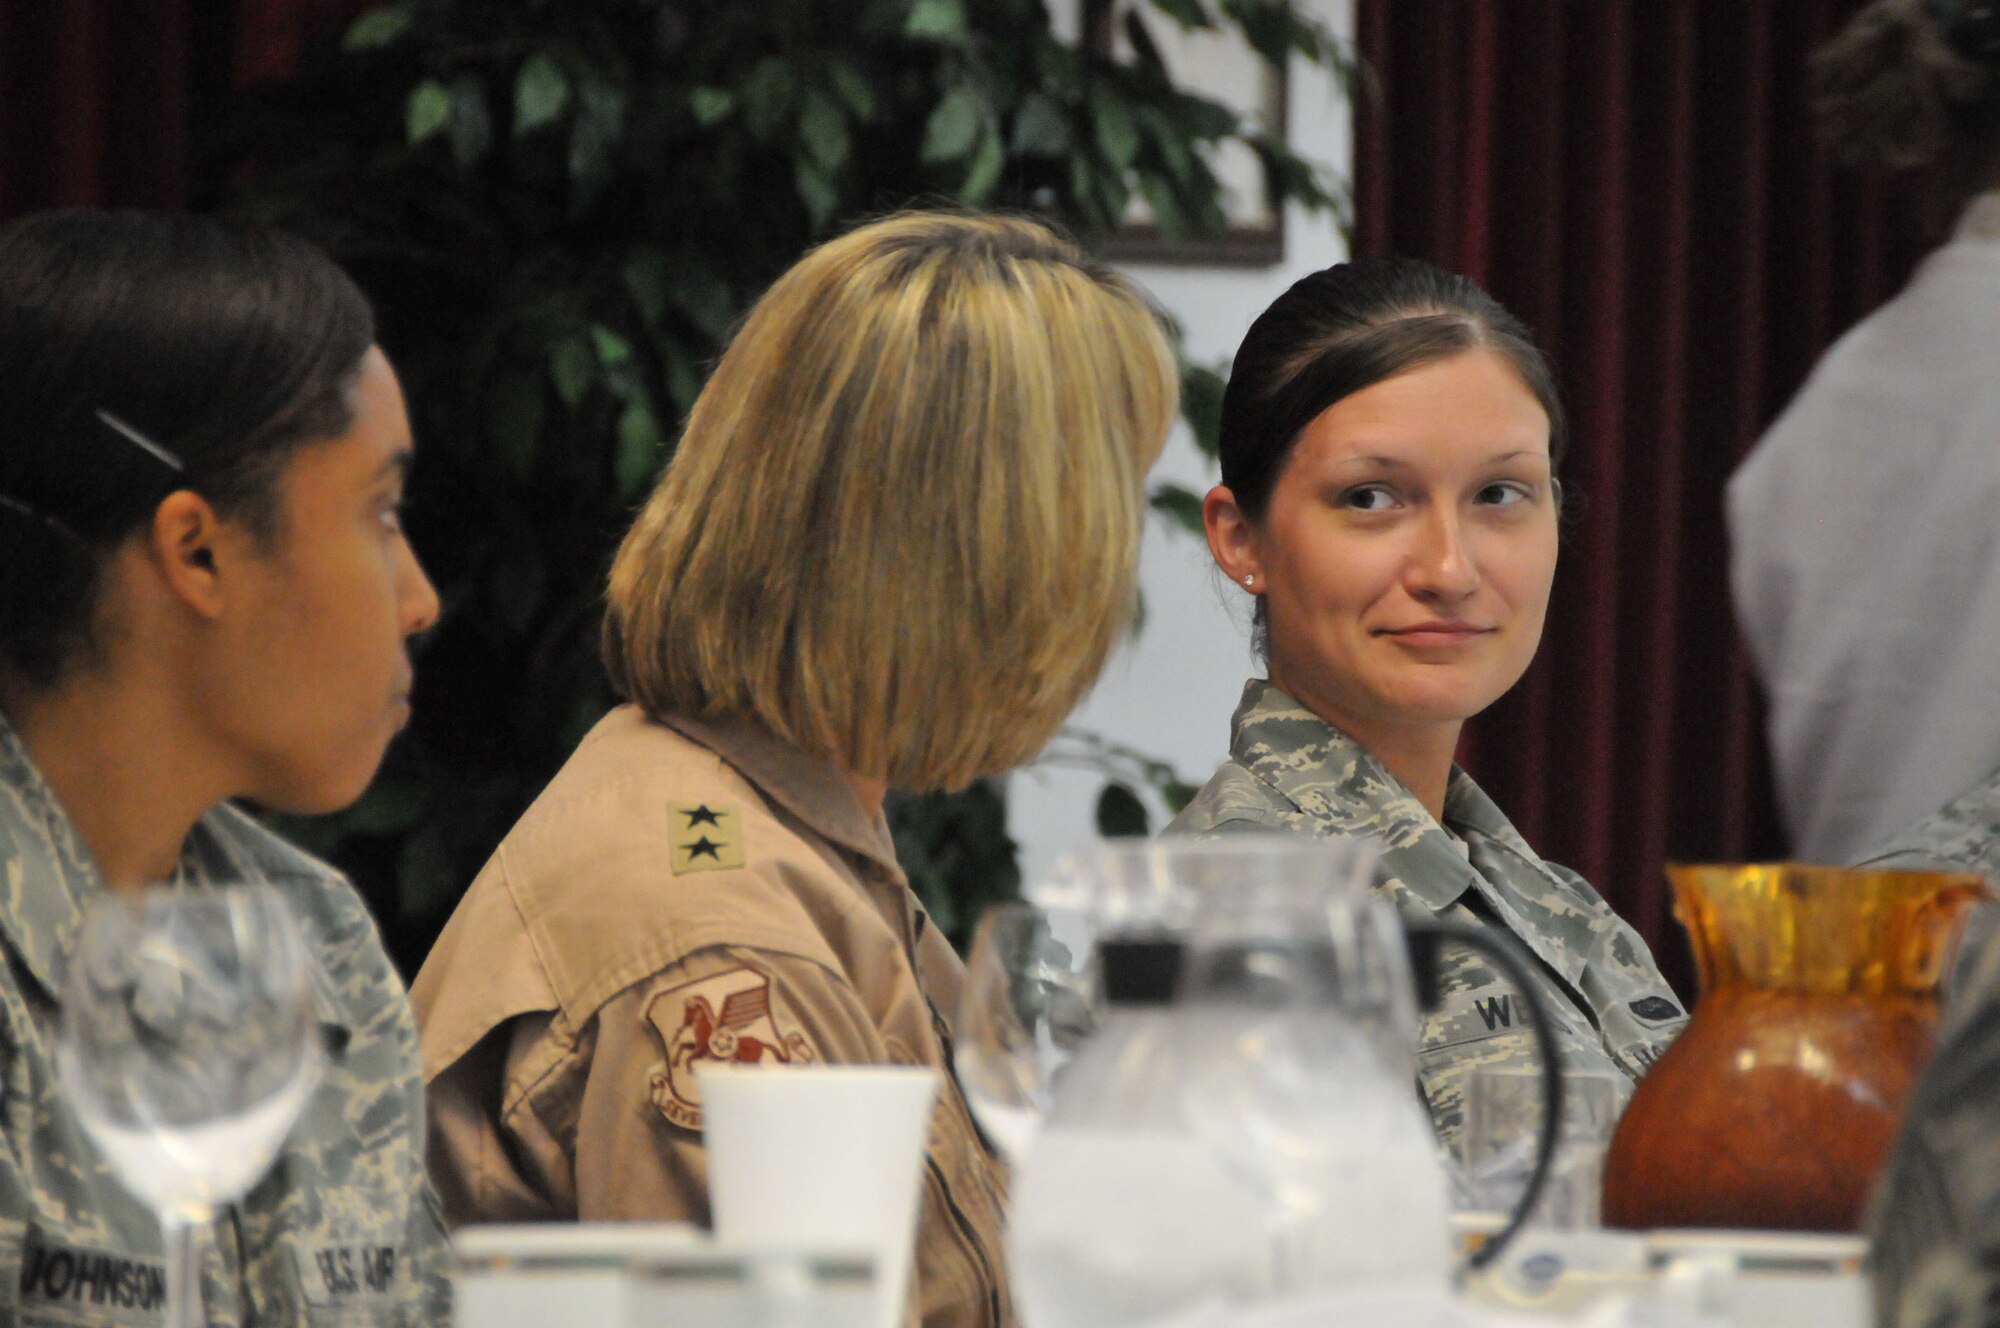 Maj. Gen. Margaret H. Woodward, Commander, 17th Air Force and U.S. Air Forces Africa answers questions during a lunch with Airmen from the 313th Air Expeditionary Wing, June 21, 2011. (U.S. Air Force photo/Capt. John P. Capra)